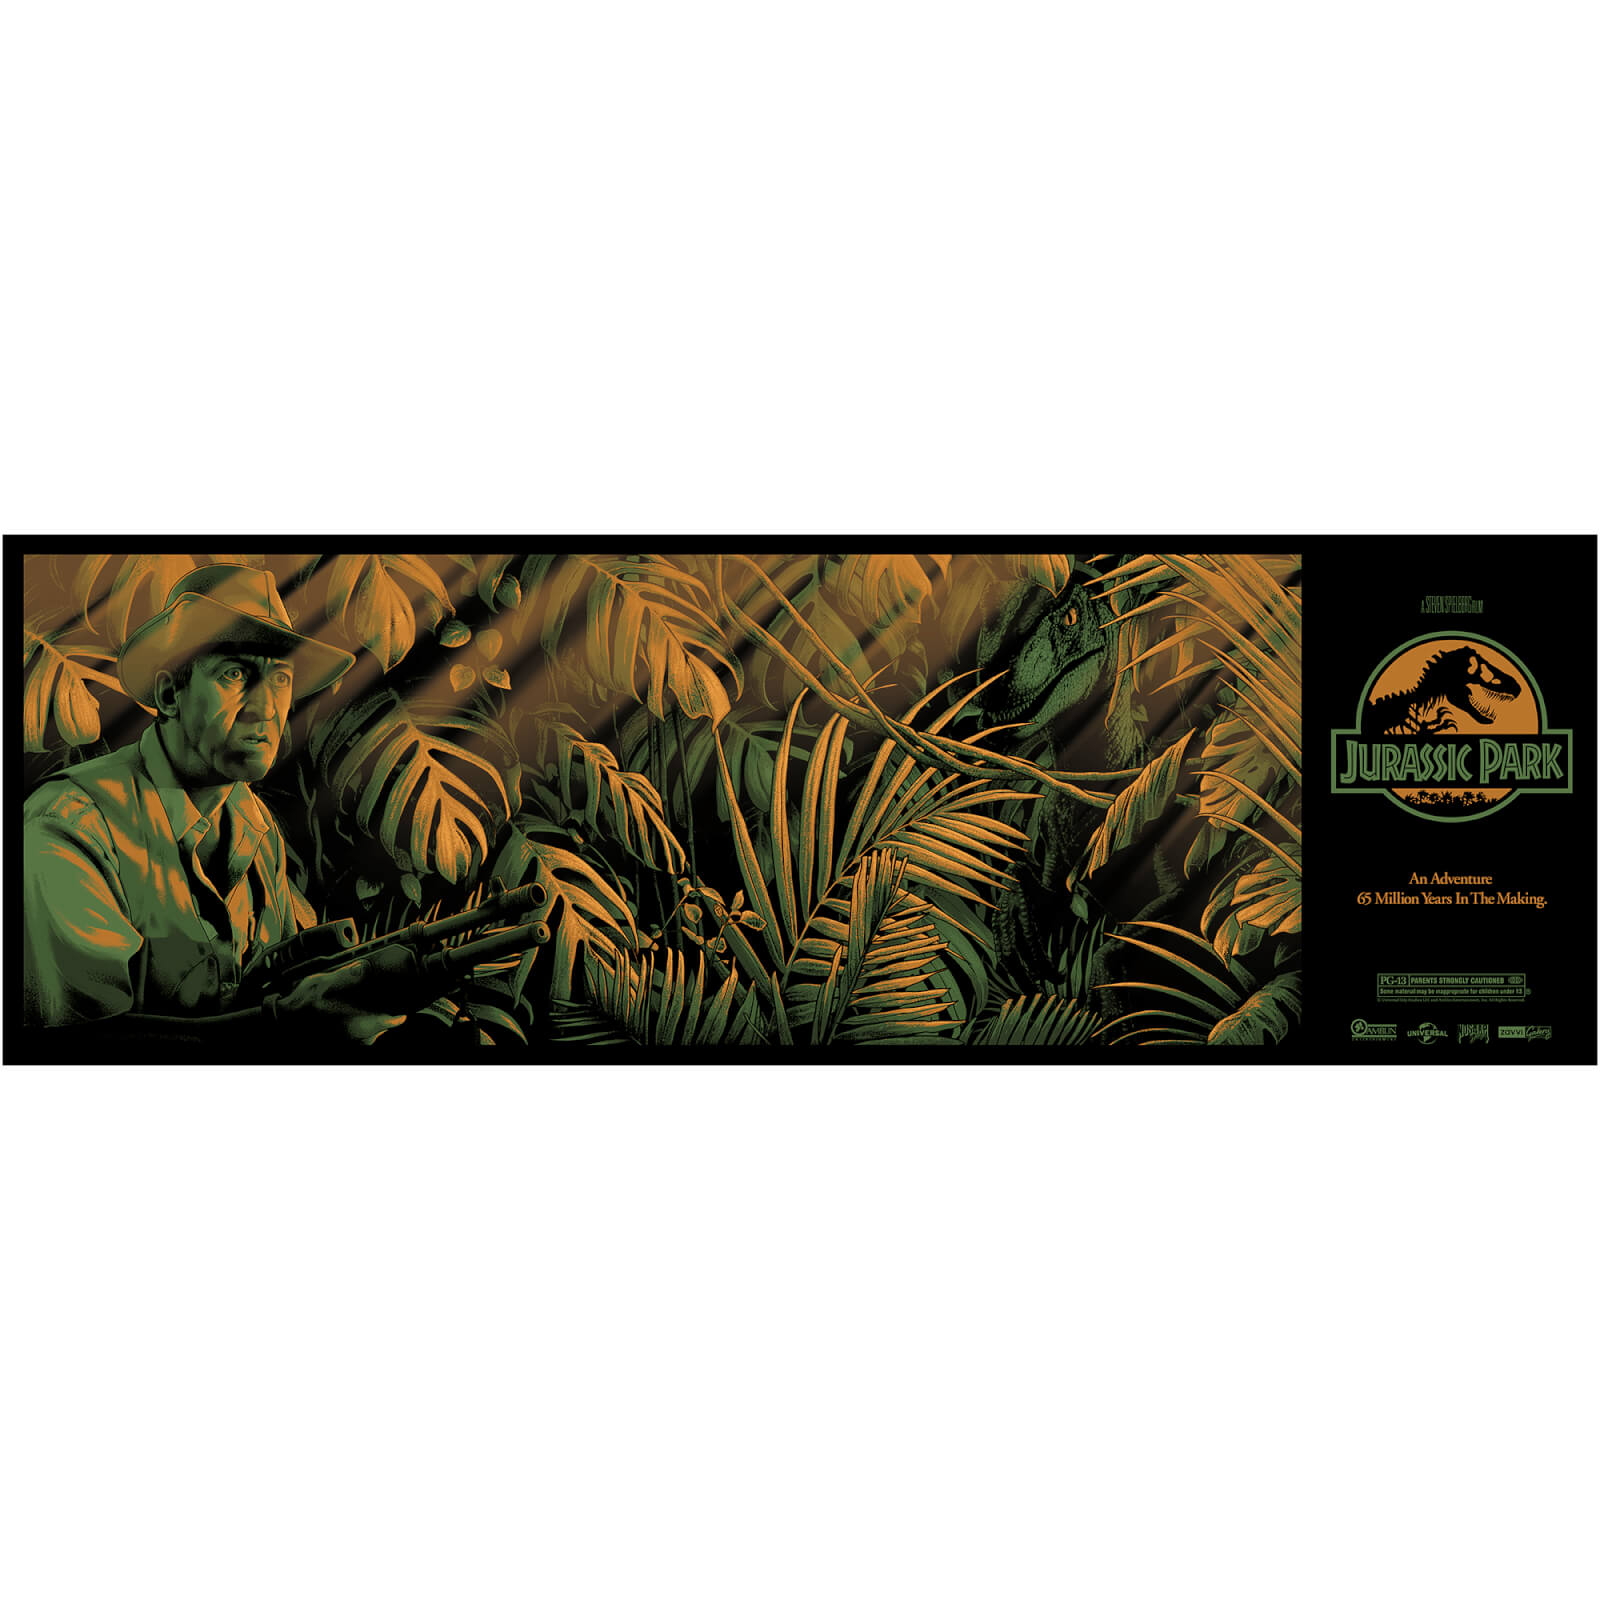 Jurassic Park Clever Girl Screen Print - 36 x 12 inch - By Nos4a2 Design